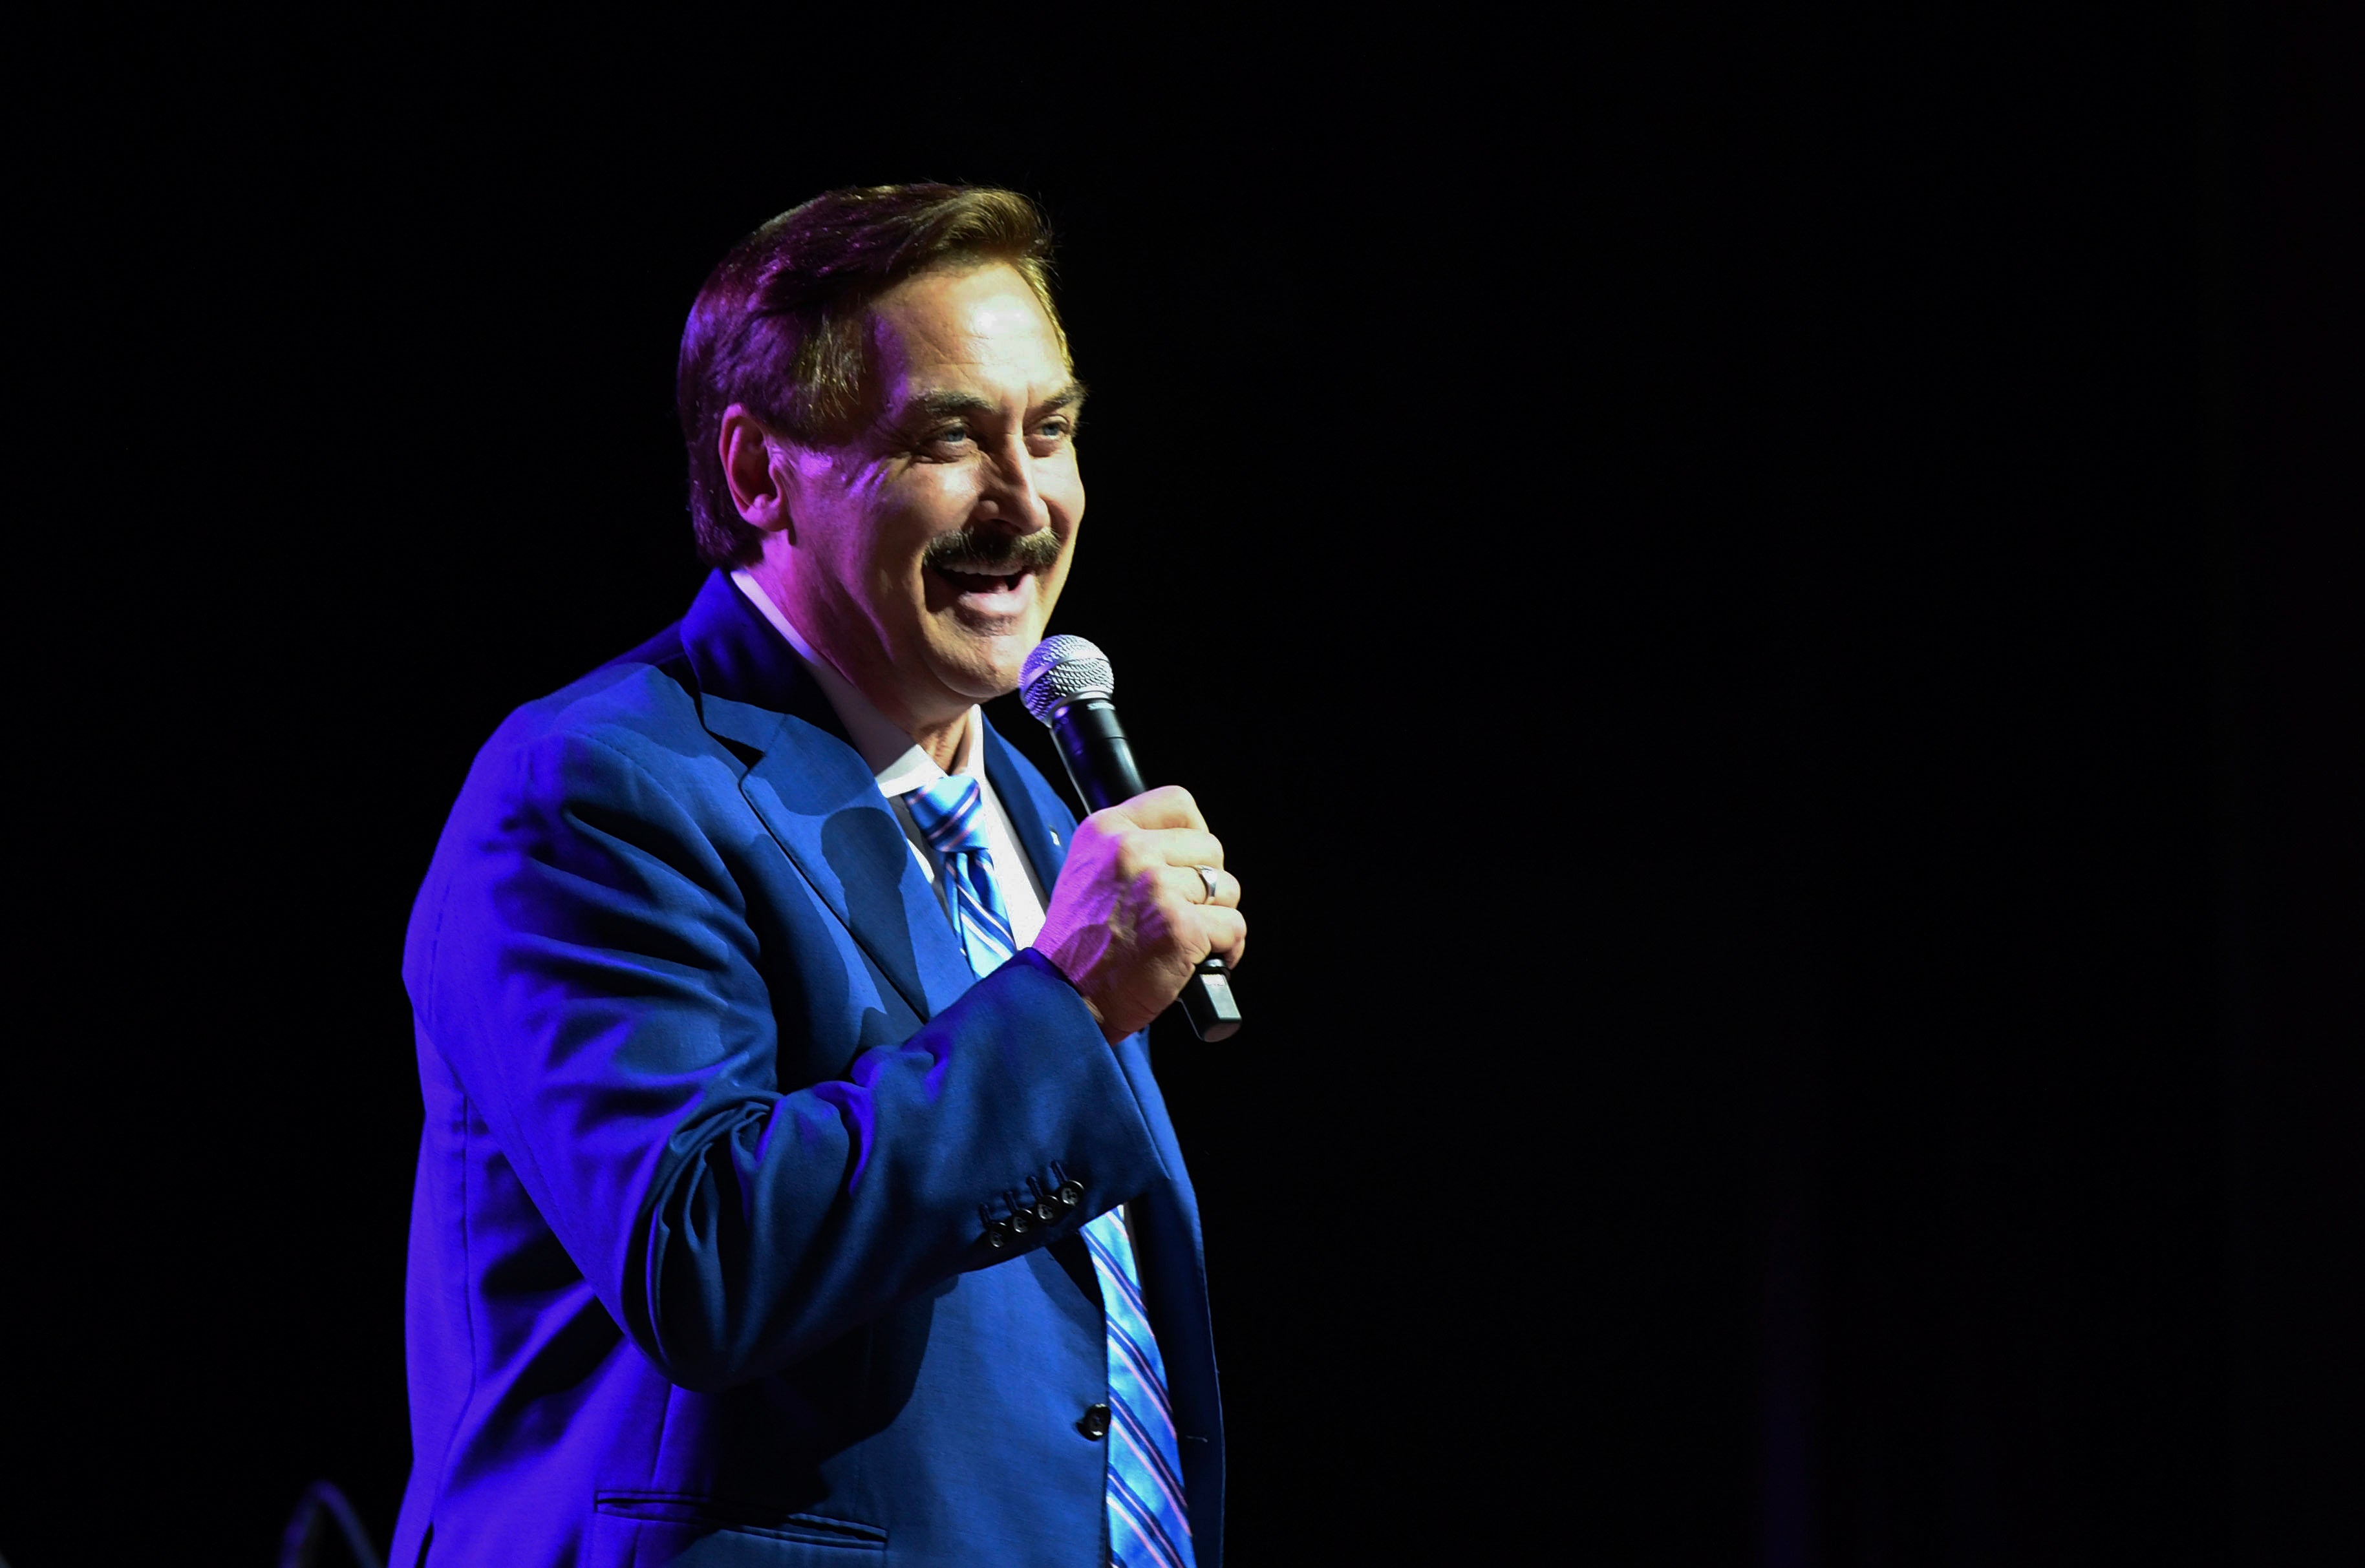 MyPillow CEO Mike Lindell speaks at a campaign event.